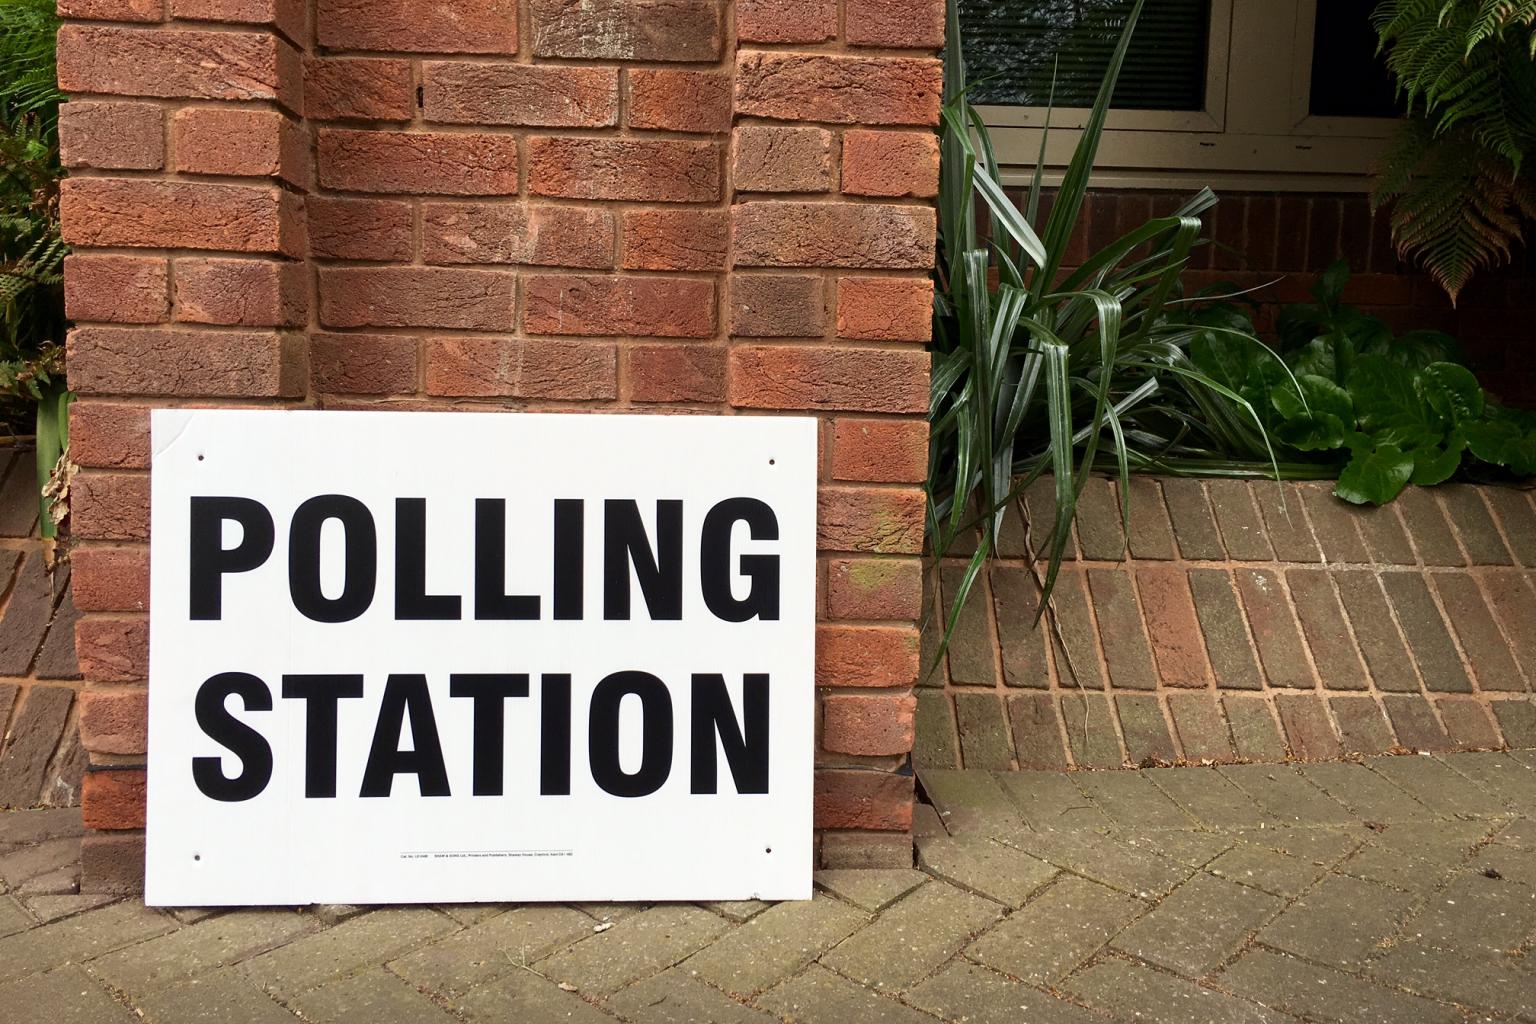 Polling station sign outside building